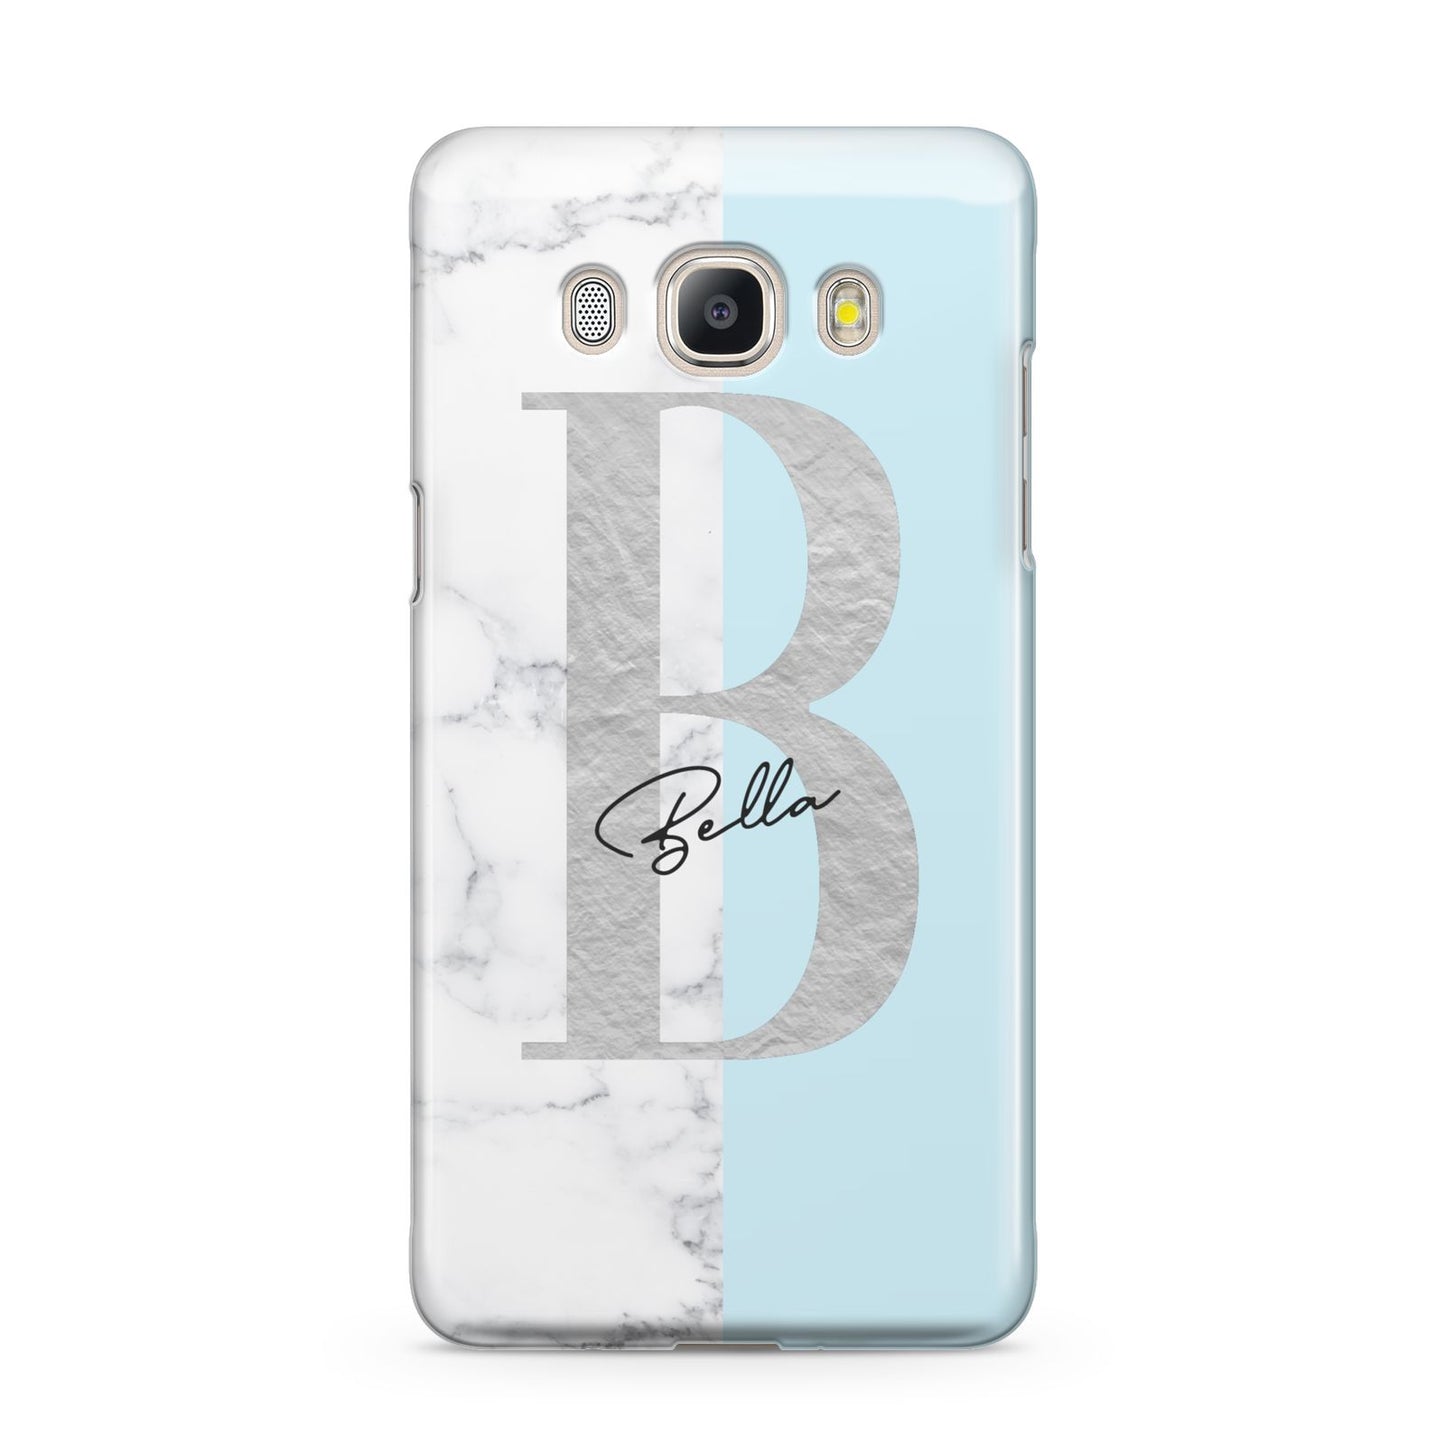 Personalised Chrome Marble Samsung Galaxy J5 2016 Case